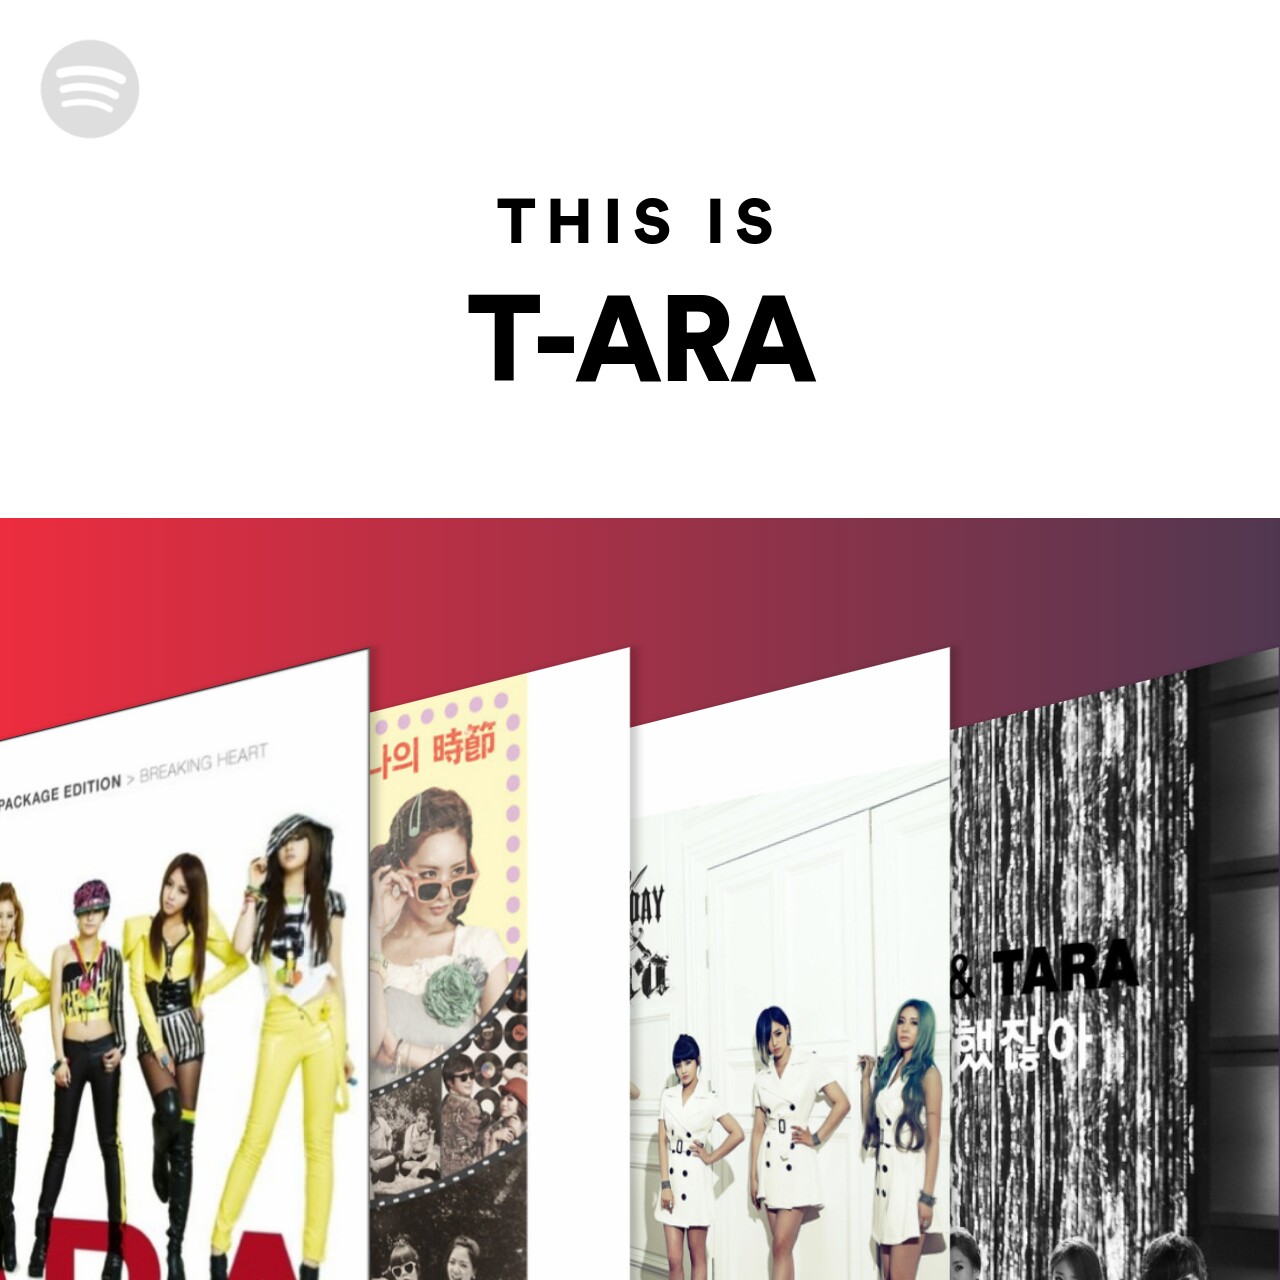 This Is T-ARA